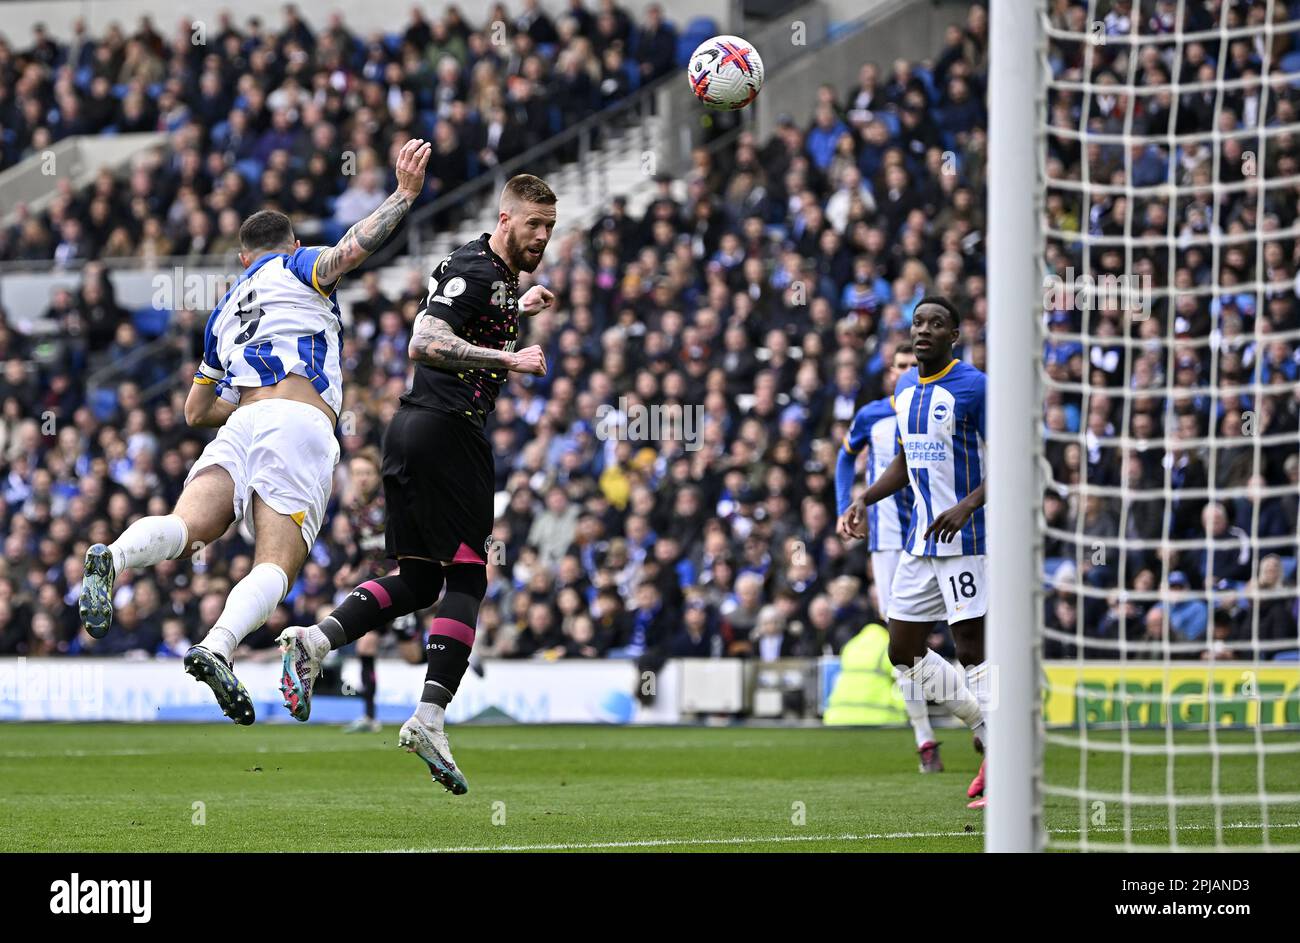 Brighton East Sussex, UK. 1st Apr, 2023. GOAL. Pontus Jansson (Brentford) gets in front of Lewis Dunk (Brighton) to score the first Brentford goal during the Brighton V Brentford Premier League match at the Amex Stadium, Brighton. Credit: MARTIN DALTON/Alamy Live News Stock Photo